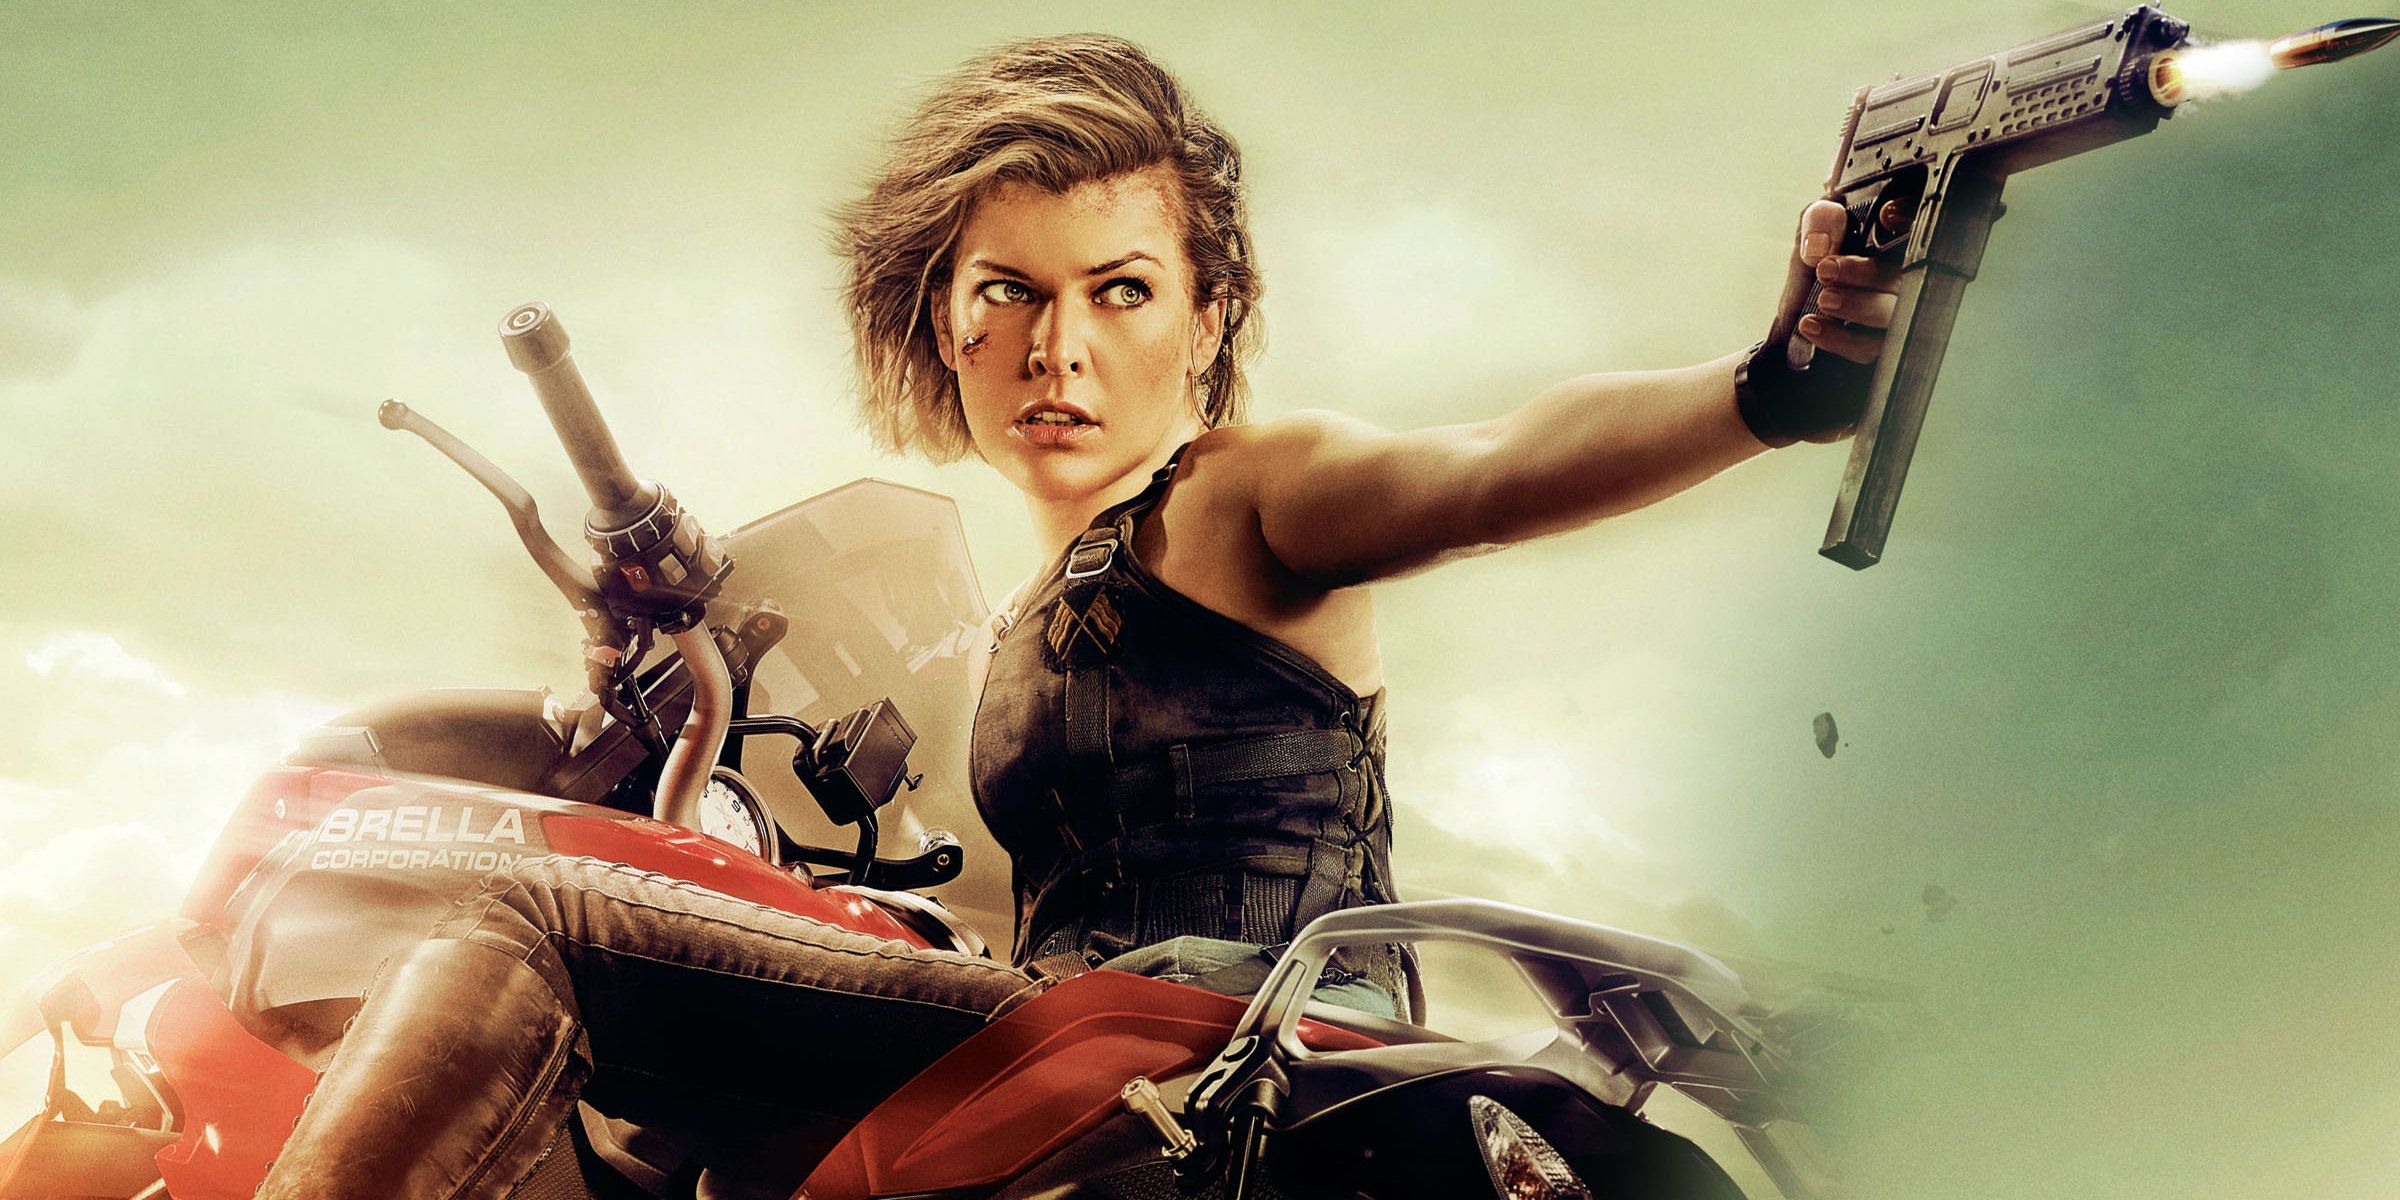 RESIDENT EVIL: THE FINAL CHAPTER CLIP COMPILATION #2 (2016) Sci-Fi, Milla  Jovovich 